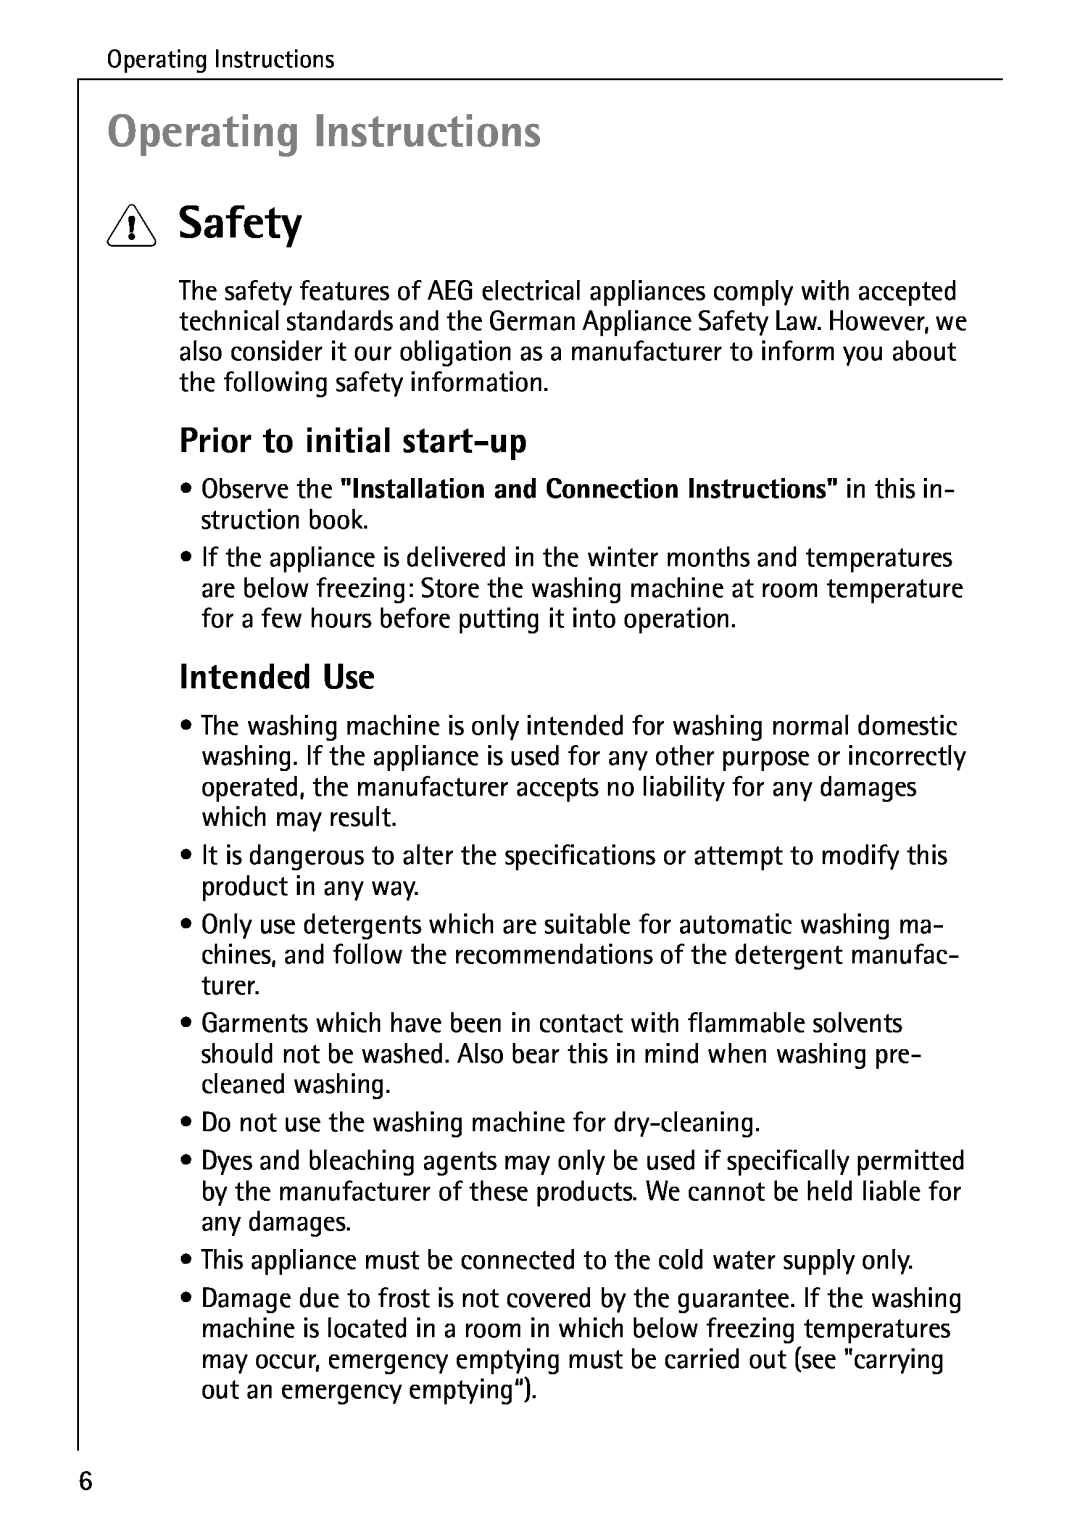 Electrolux LAVAMAT W 1259 manual Operating Instructions, Safety, Prior to initial start-up, Intended Use 